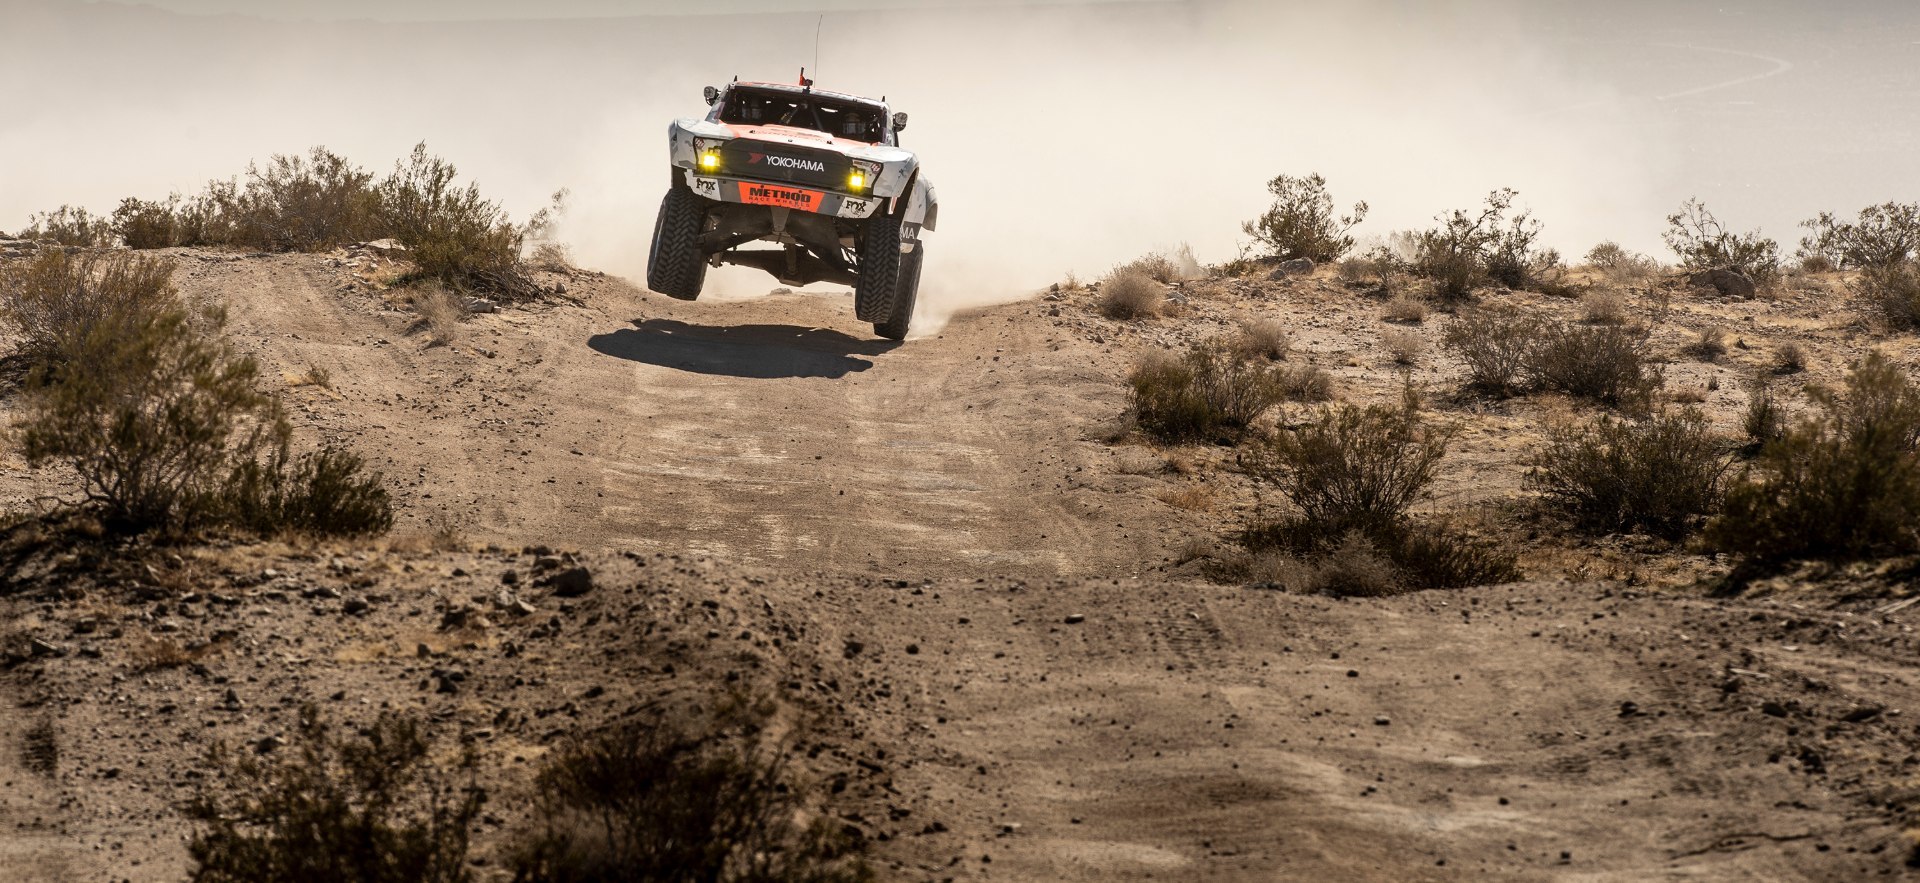 Mint 400 Race Details & Course Map Live Stream from Vegas! onX